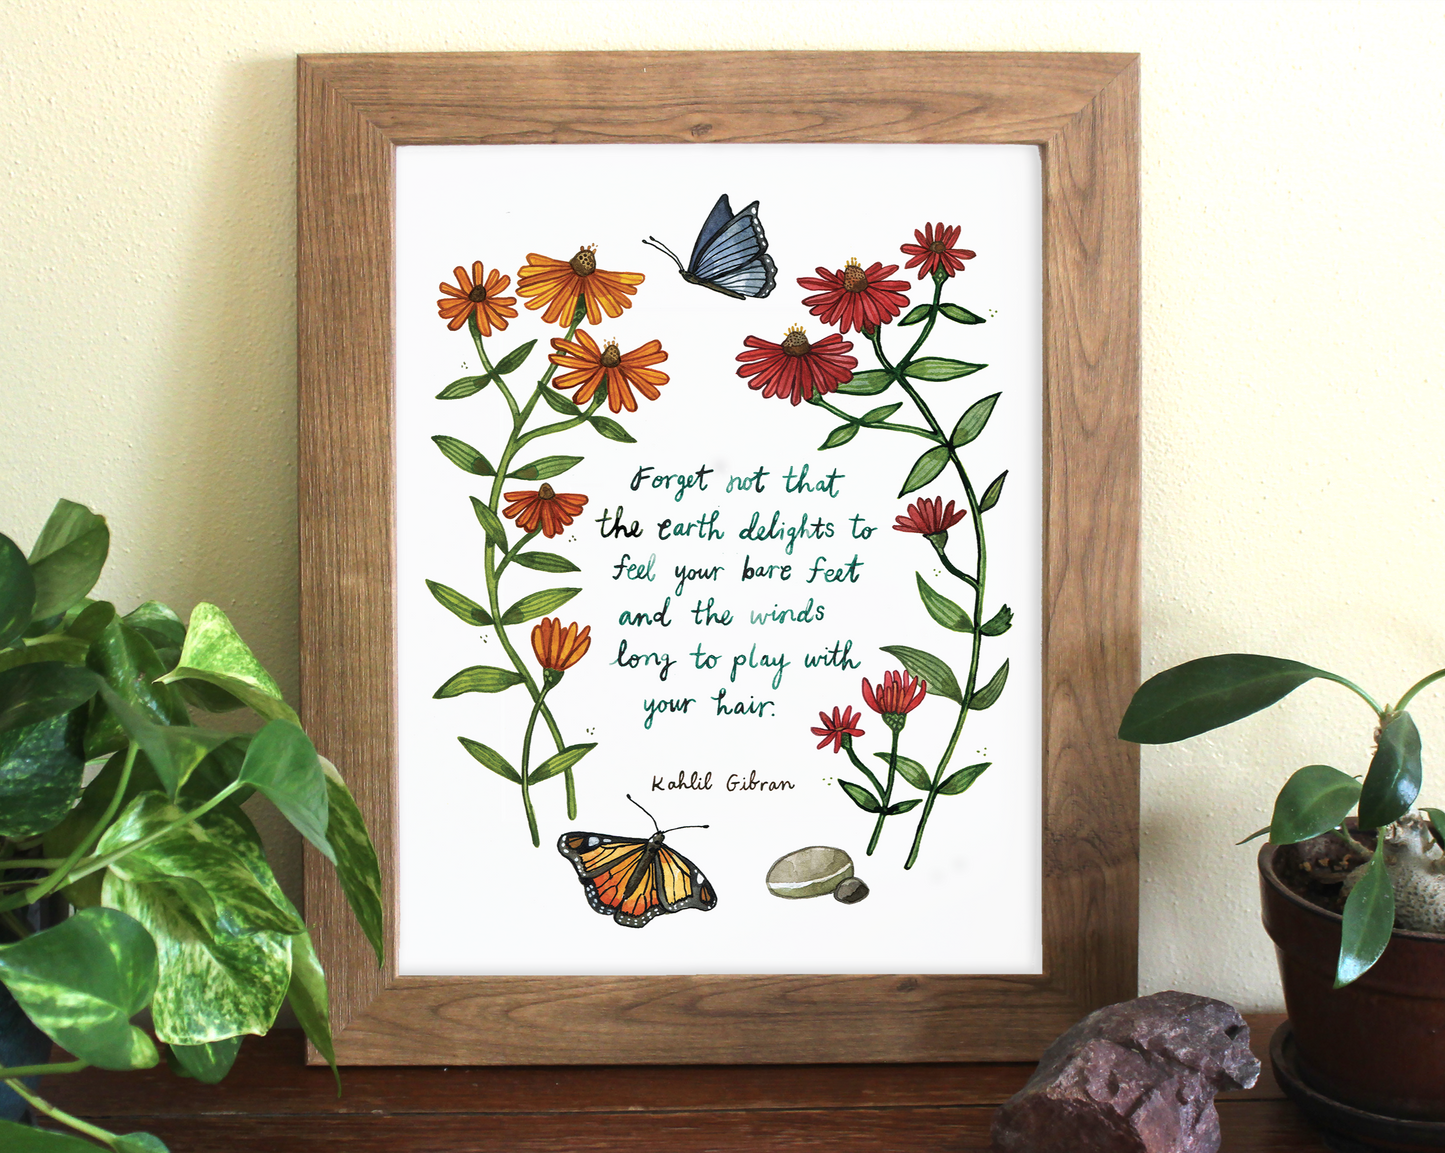 "The Earth Delights To Feel Your Bare Feet" Kahlil Gibran Quote - Art Print